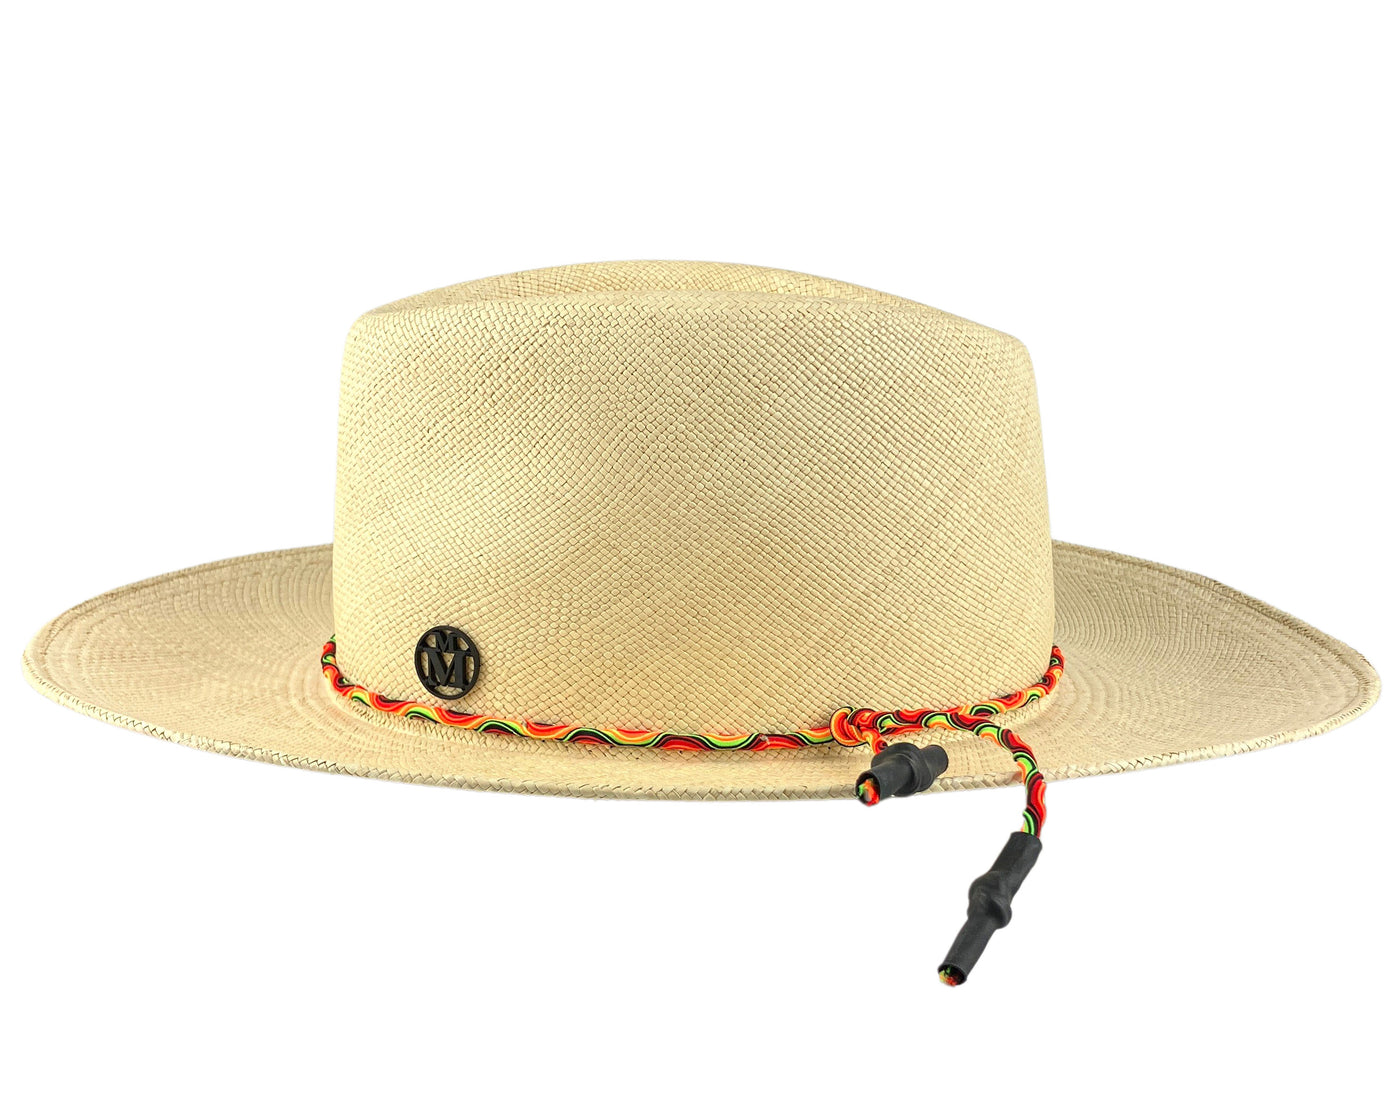 Maison Michel Charles Psychedelic Ribbon Fedora in Natural - Discounts on Maison Michel at UAL